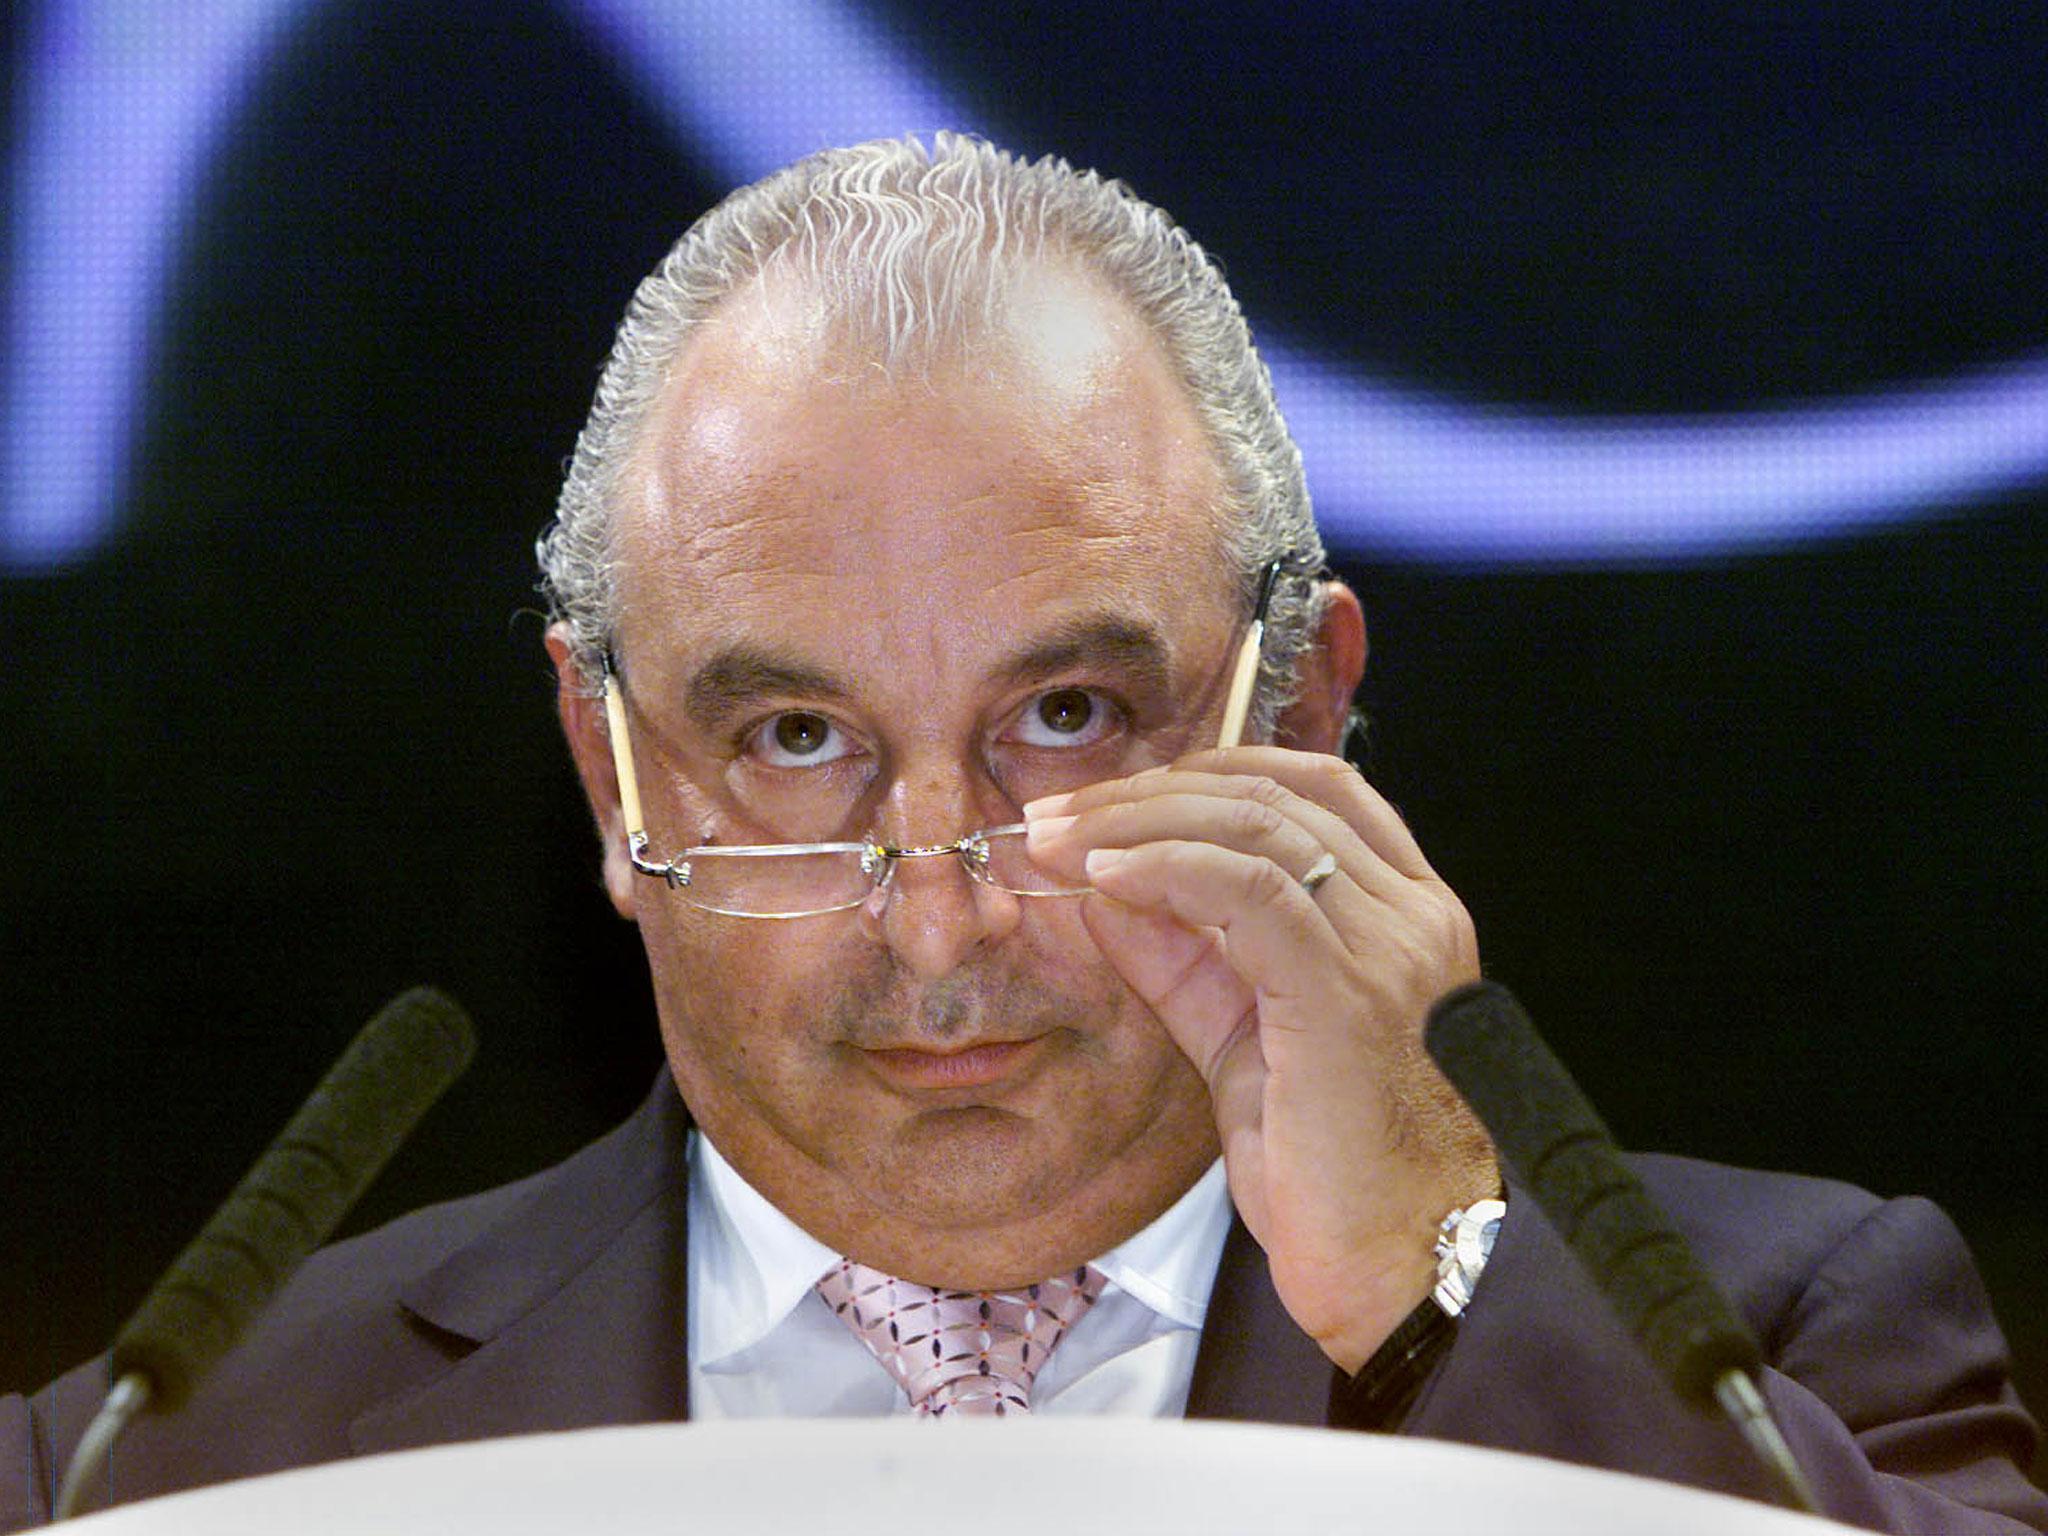 The collapse of BHS and the subsequent Parliament select committee appearance of Sir Philip Green highlighted the significance of pension liabilities